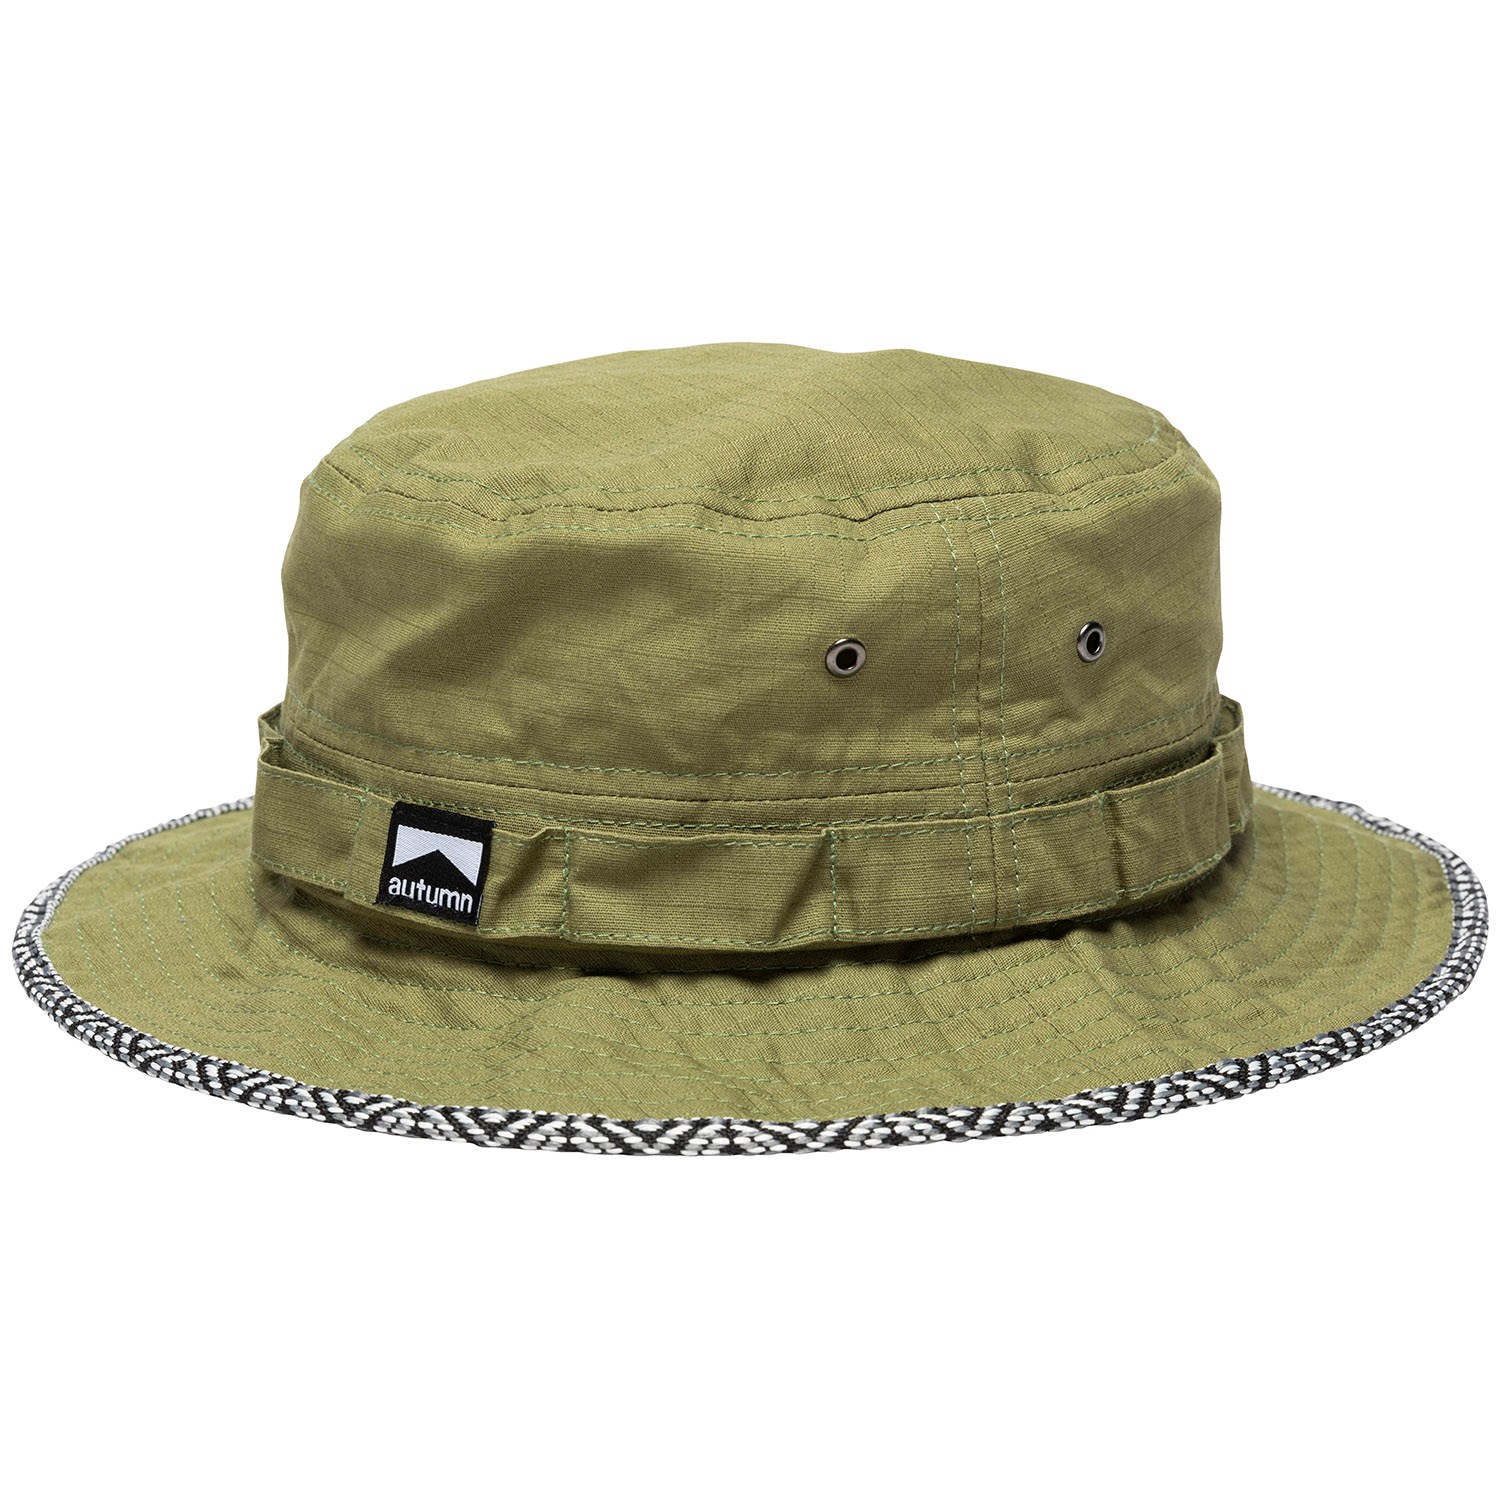 Шляпа Autumn Boonie, зеленый emersongear tactical boonie hat army hunting hat boonie cap airsoft camouflage hunting sunshine hat emerson multicam em8553